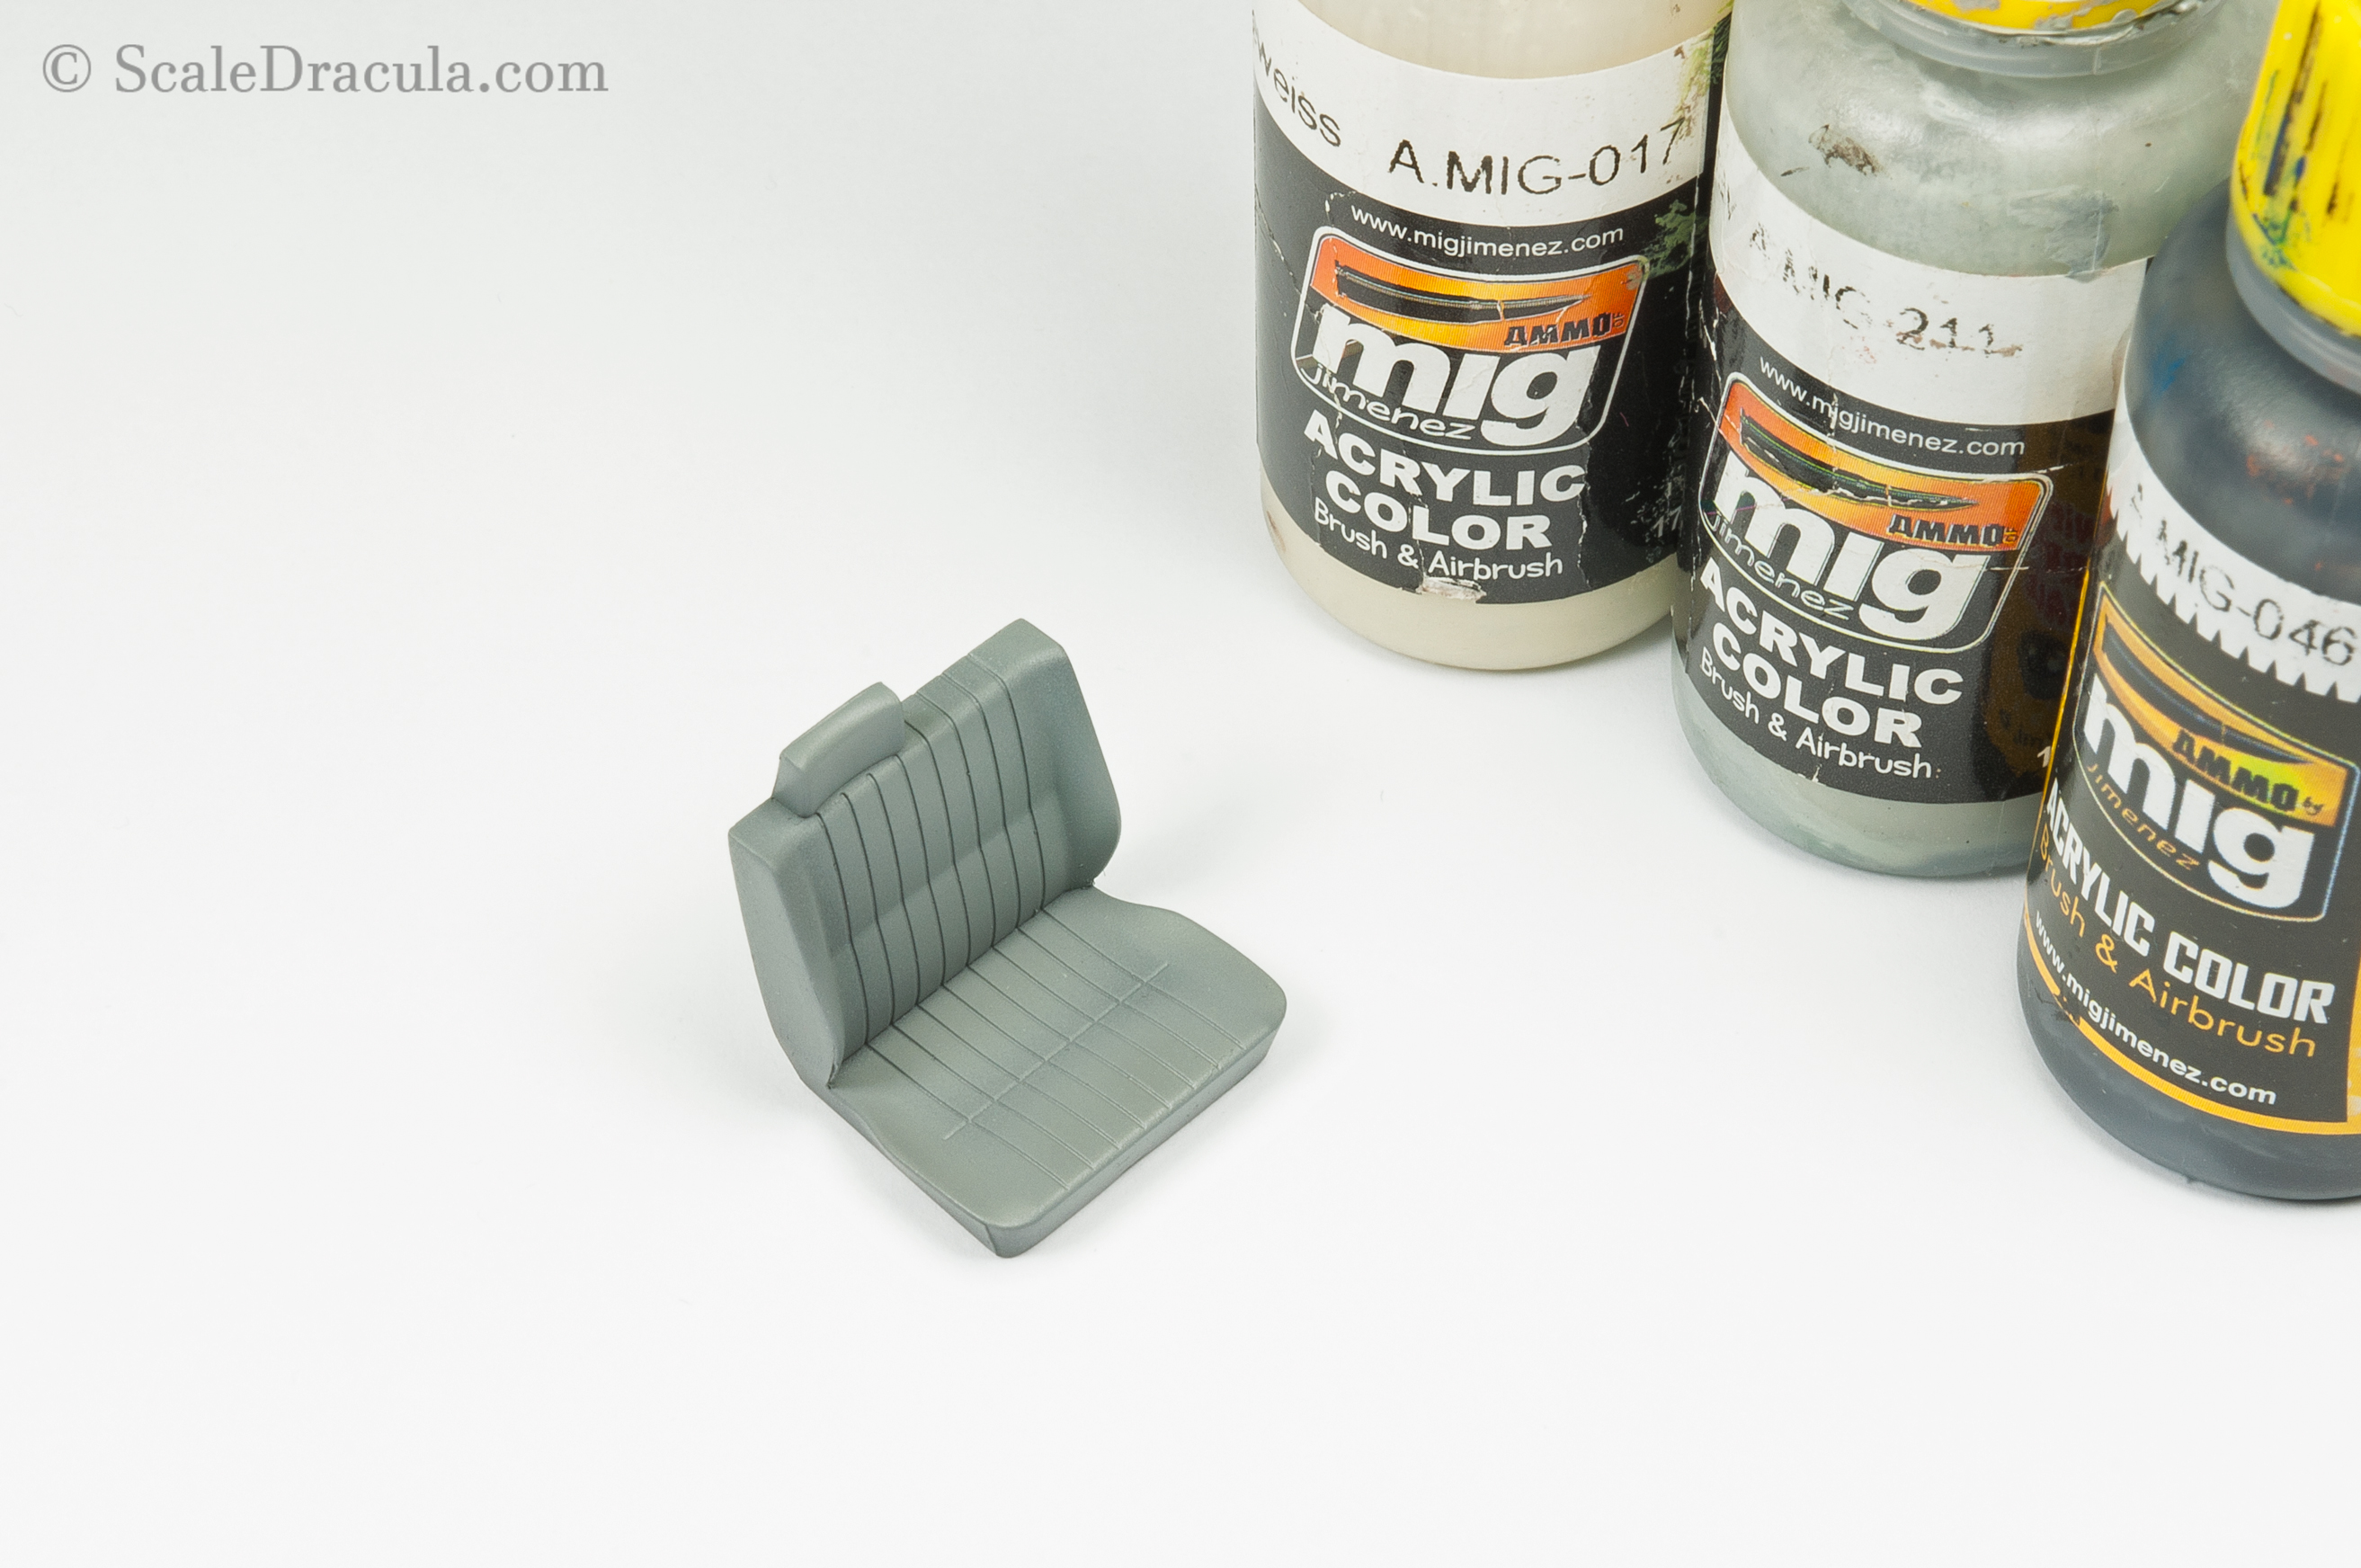 Base-coated seat, Toyota technical by Meng